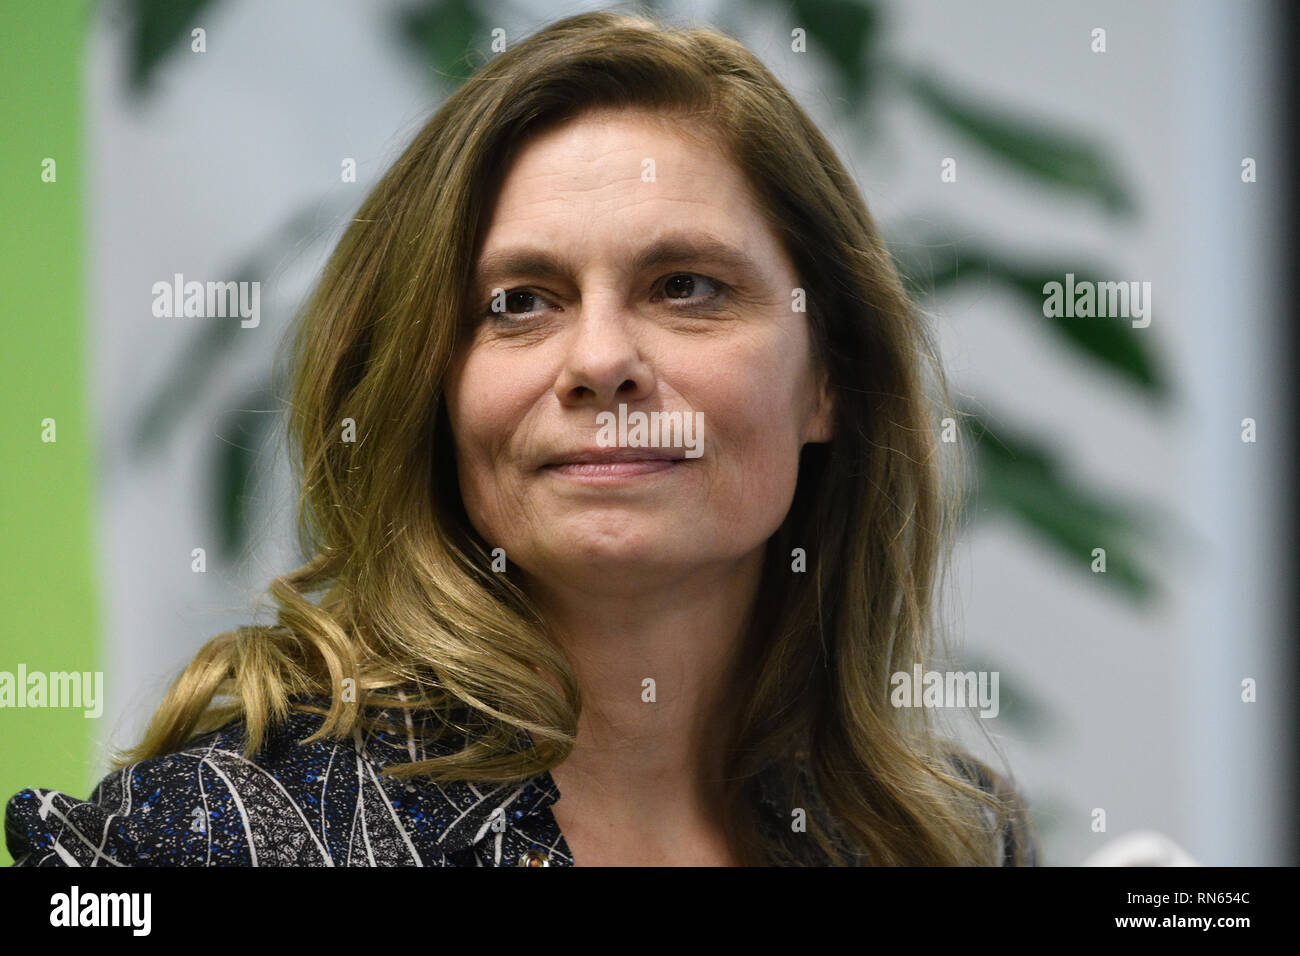 Vienna, Austria. 17 February 2019. Press Conference of the Green Party Austria. Picture shows Sarah Wiener. Credit: Franz Perc / Alamy Live News Stock Photo